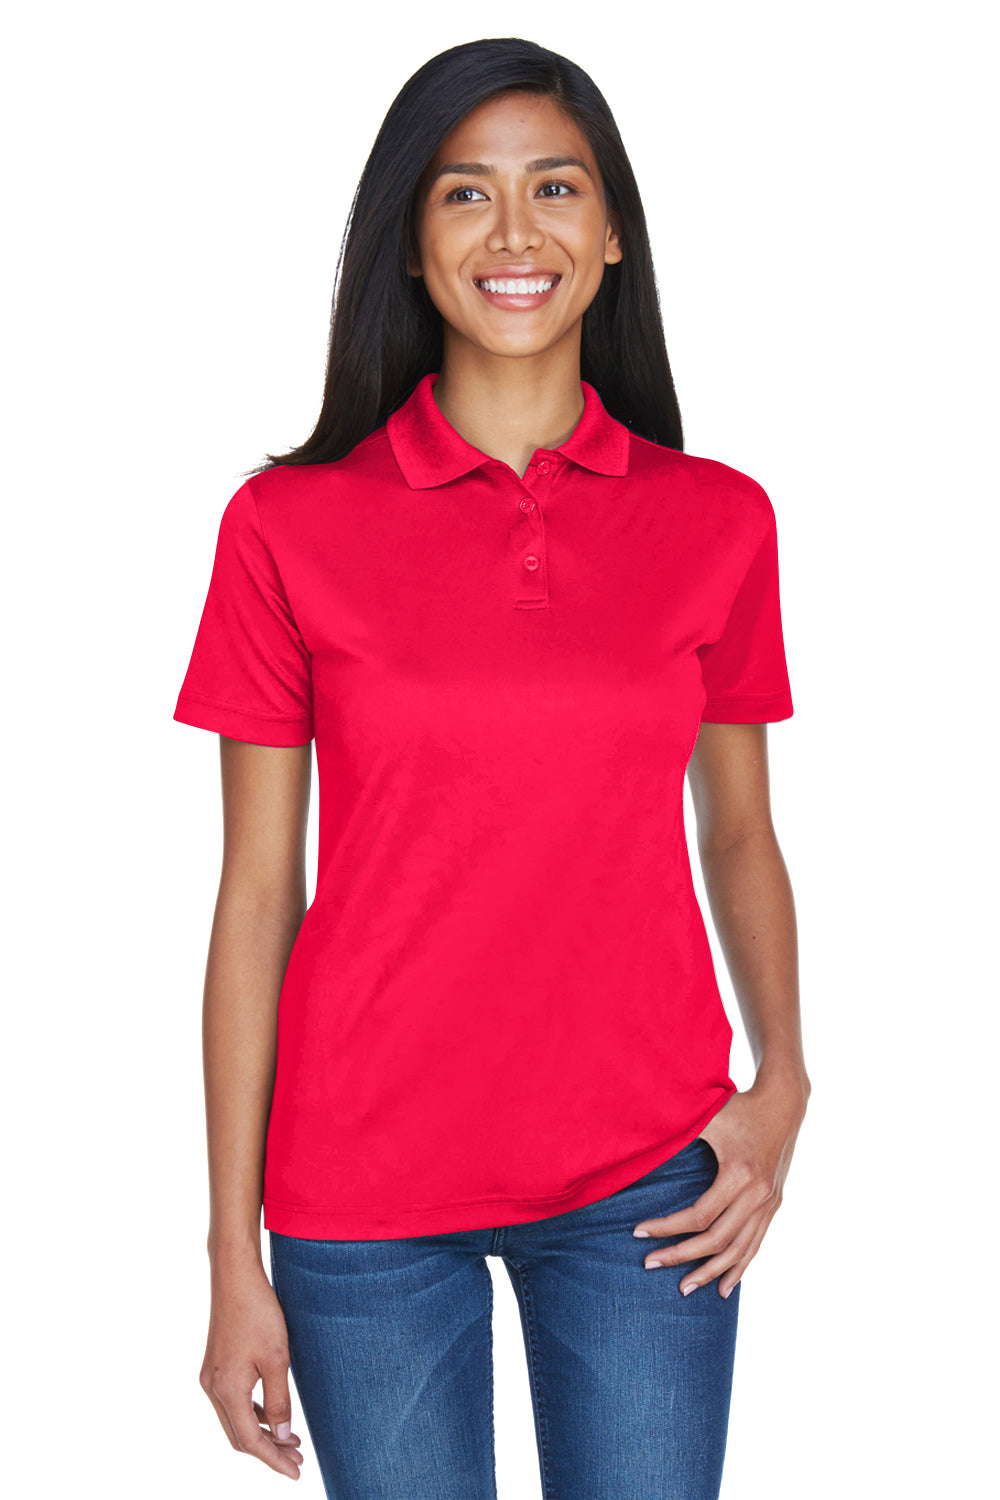 UltraClub 8404 Womens Cool & Dry Moisture Wicking Short Sleeve Polo Shirt Red Front